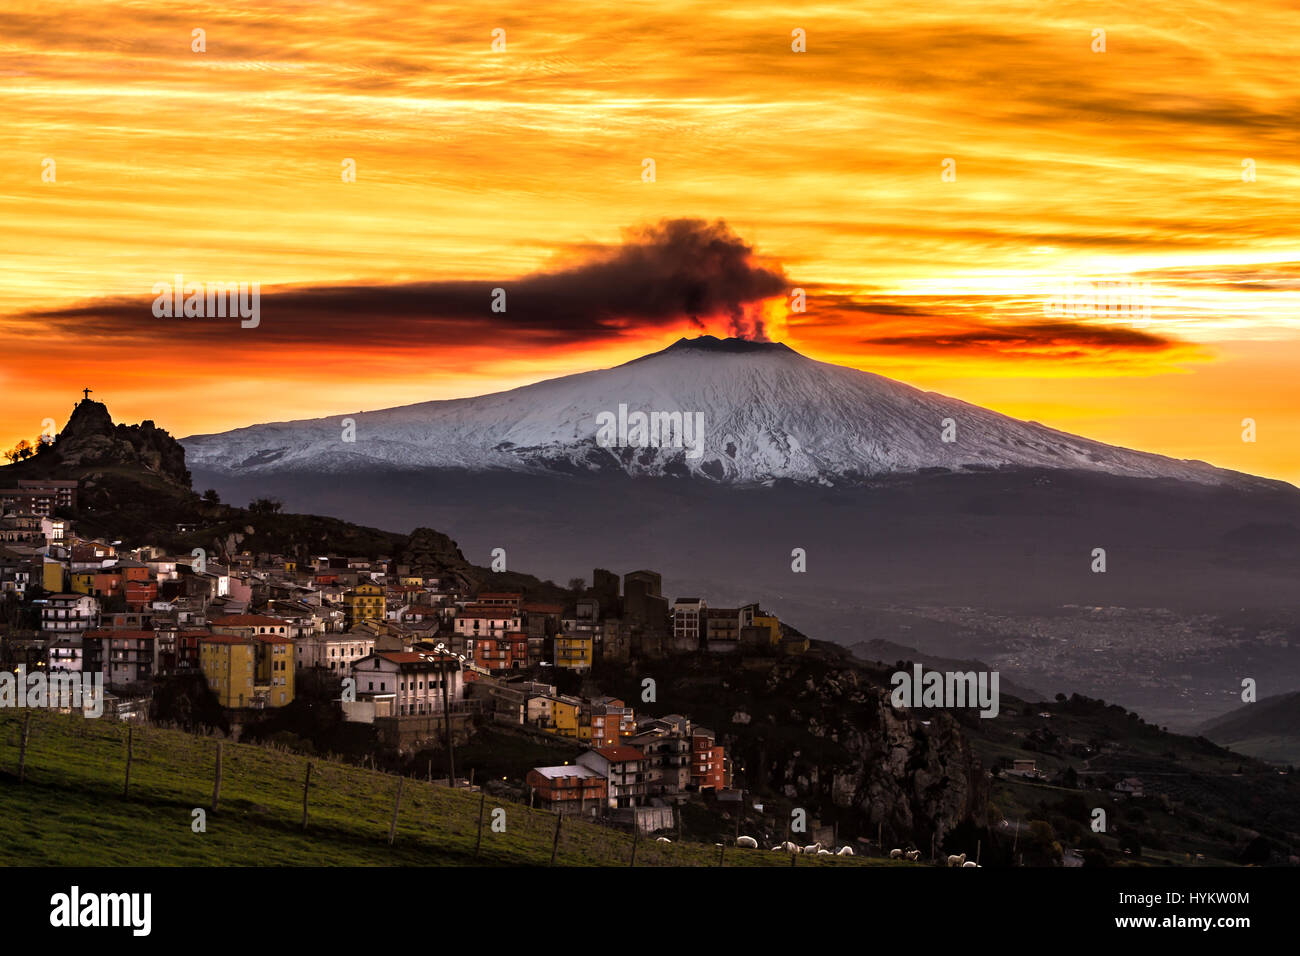 MESSINA, SICILY: A picture of Mount Etna at dawn. A NUCLEAR mushroom ...